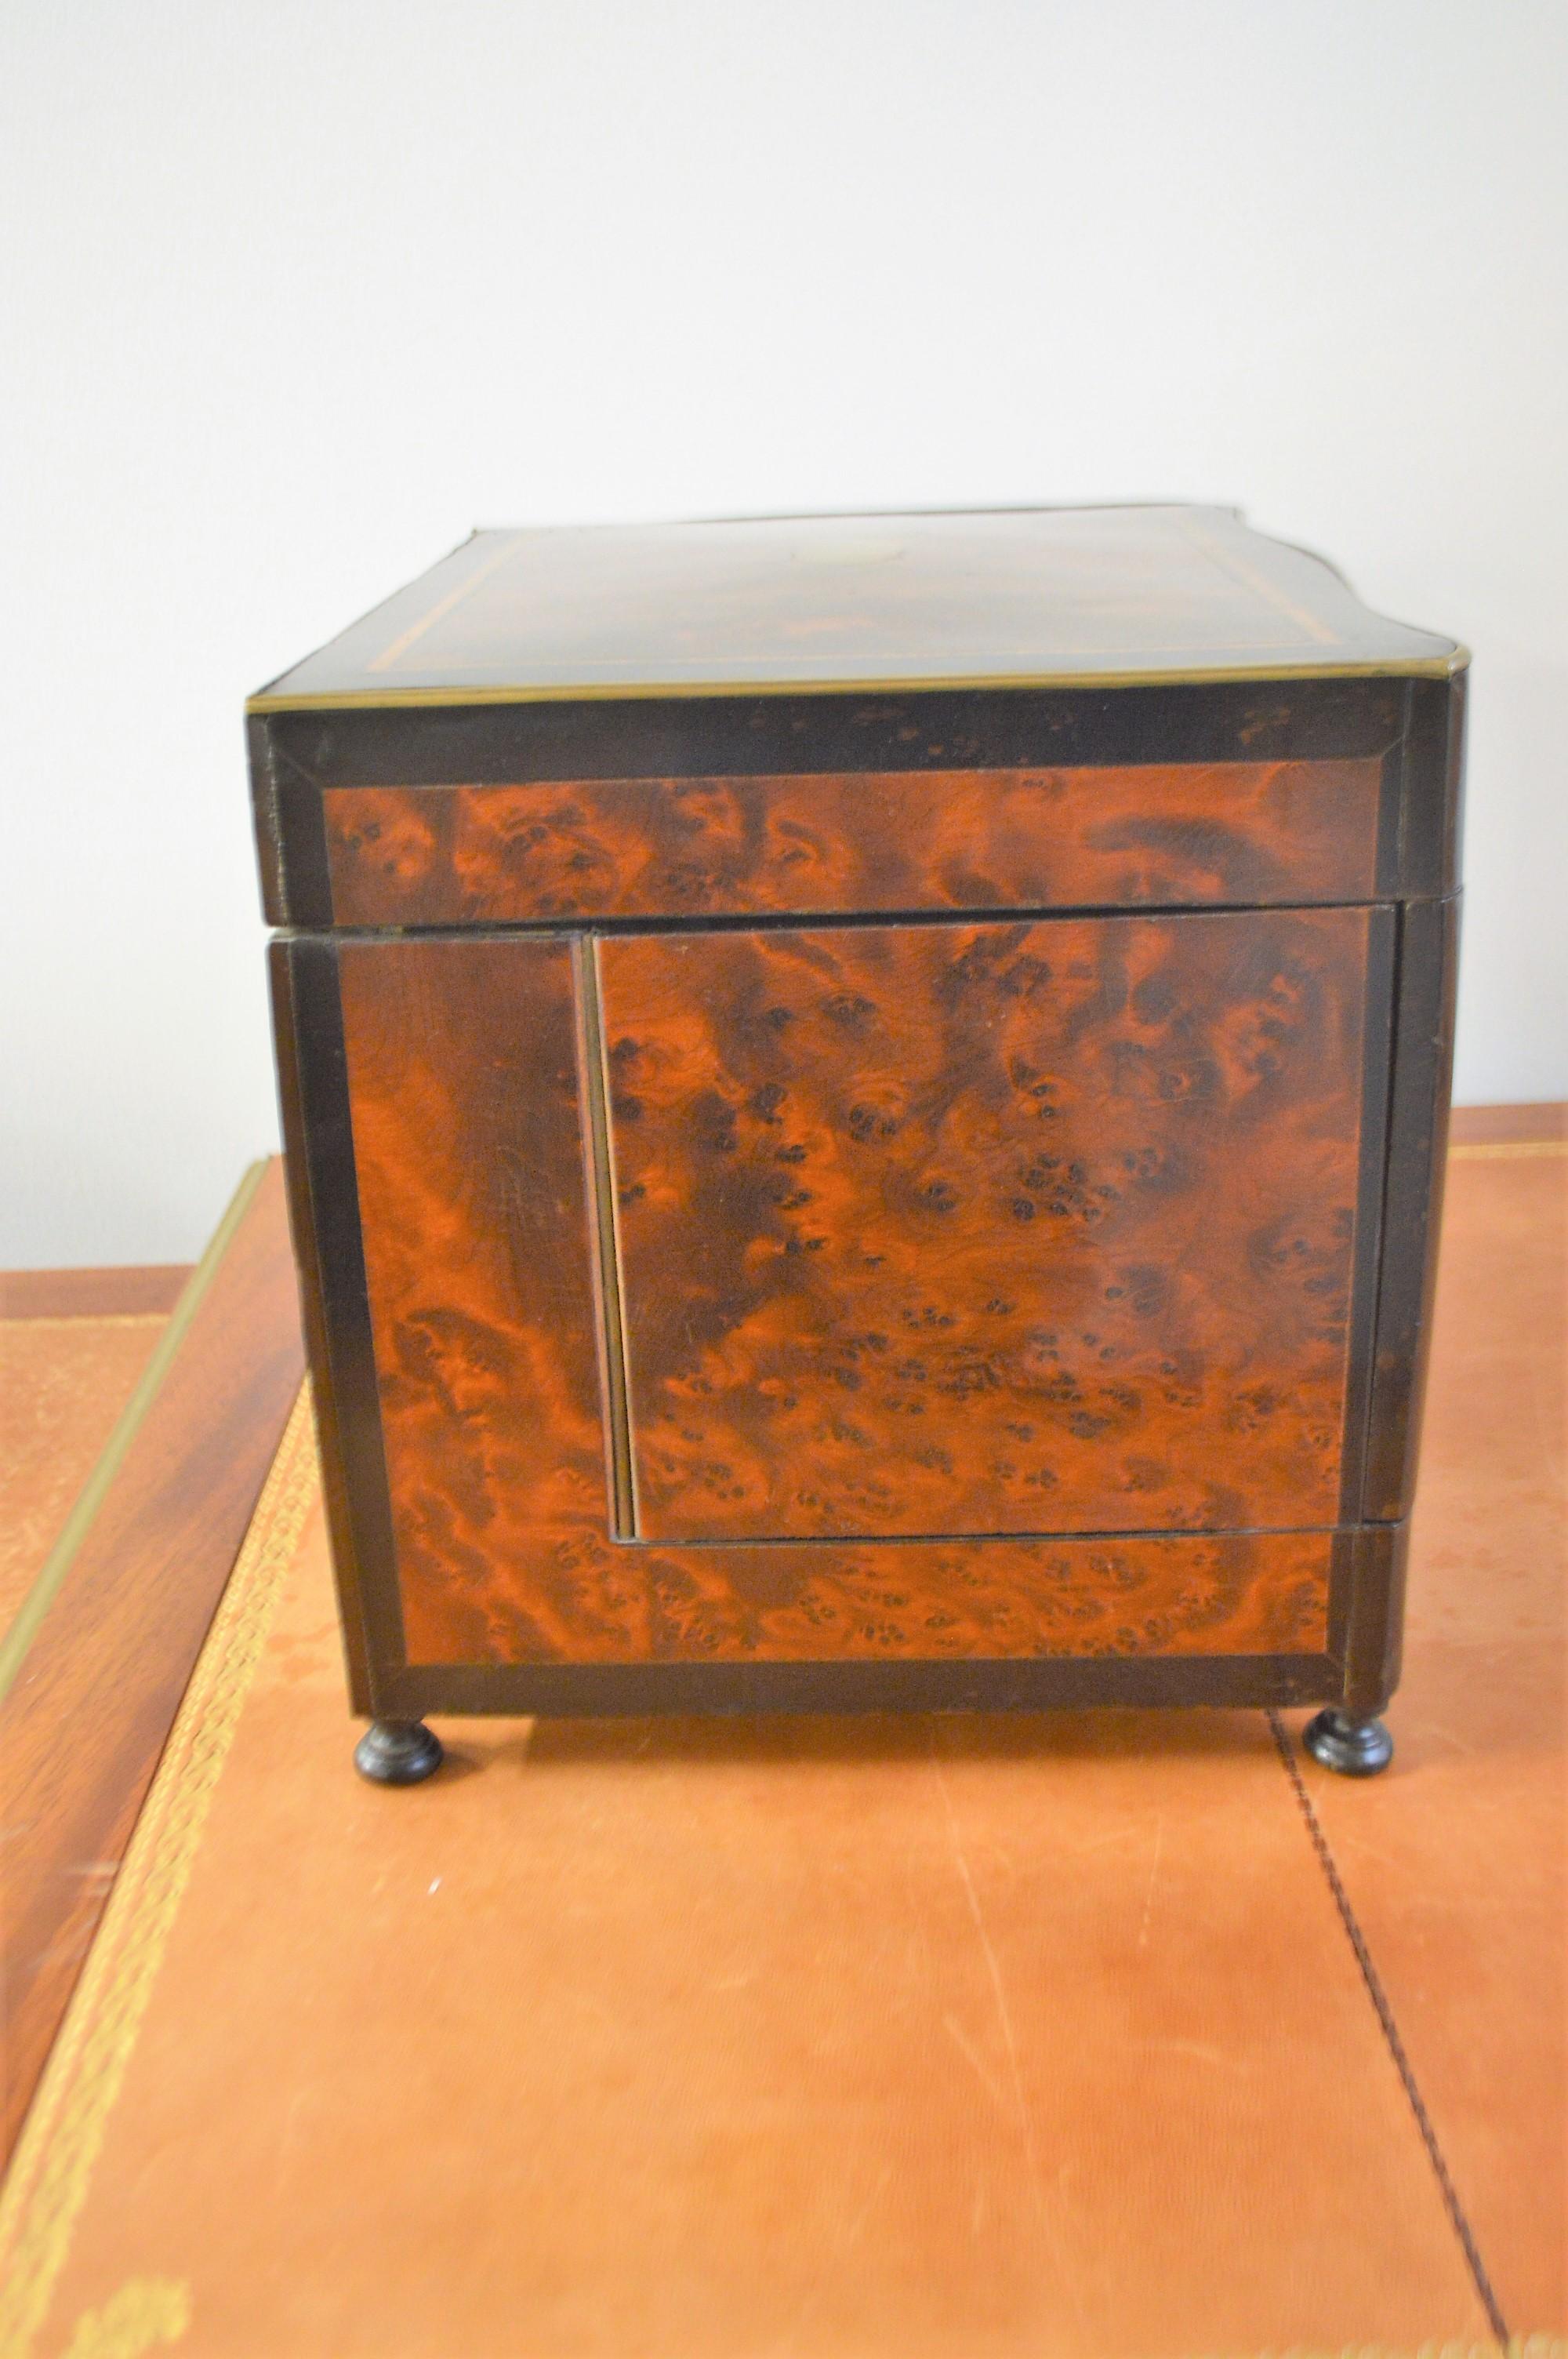 19th Century Portable Bar in a Burled Rosewood Box with Original Crystal Ware (Radiert) im Angebot